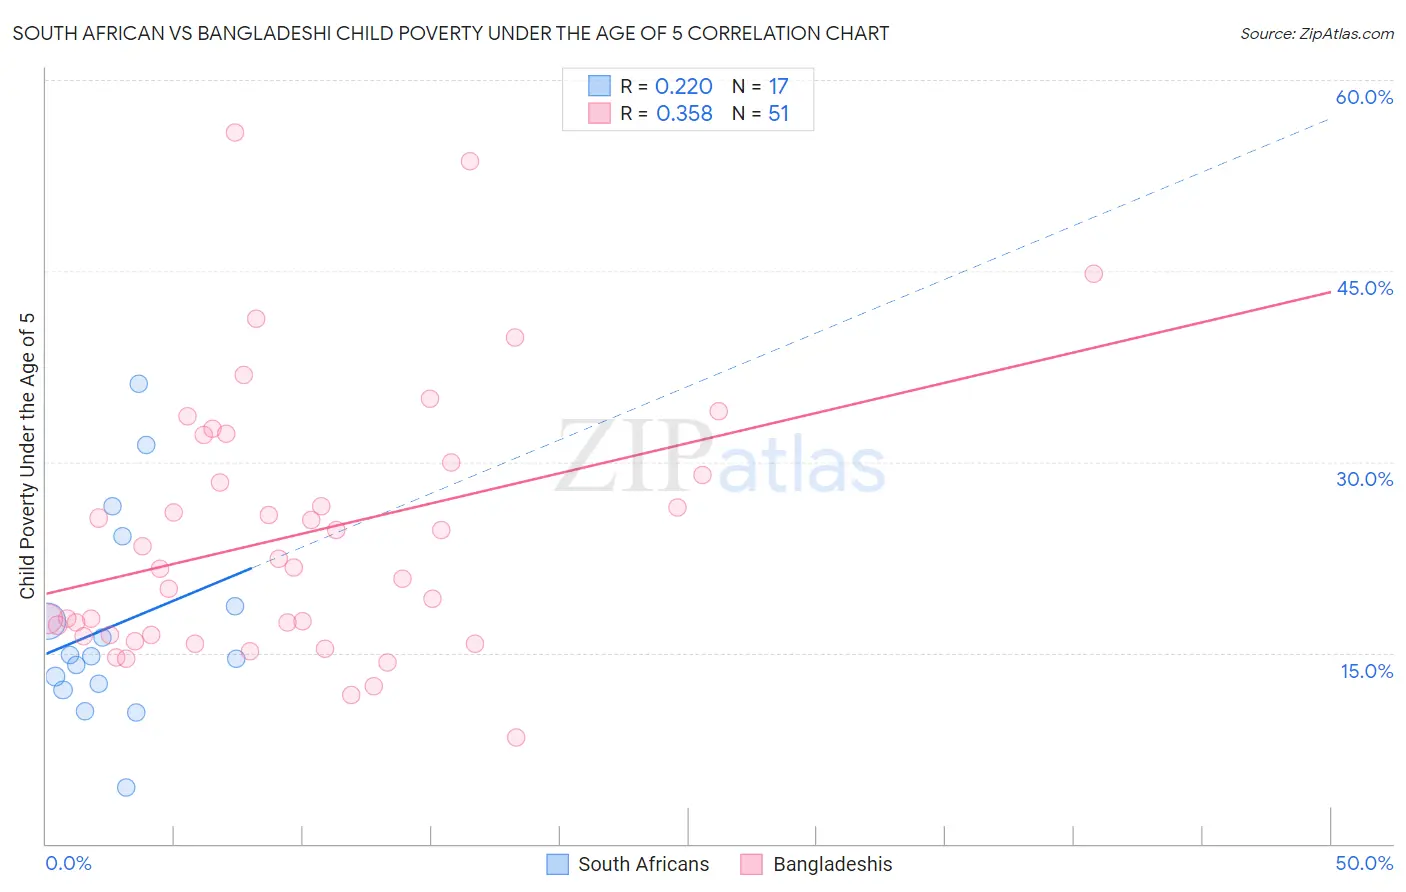 South African vs Bangladeshi Child Poverty Under the Age of 5